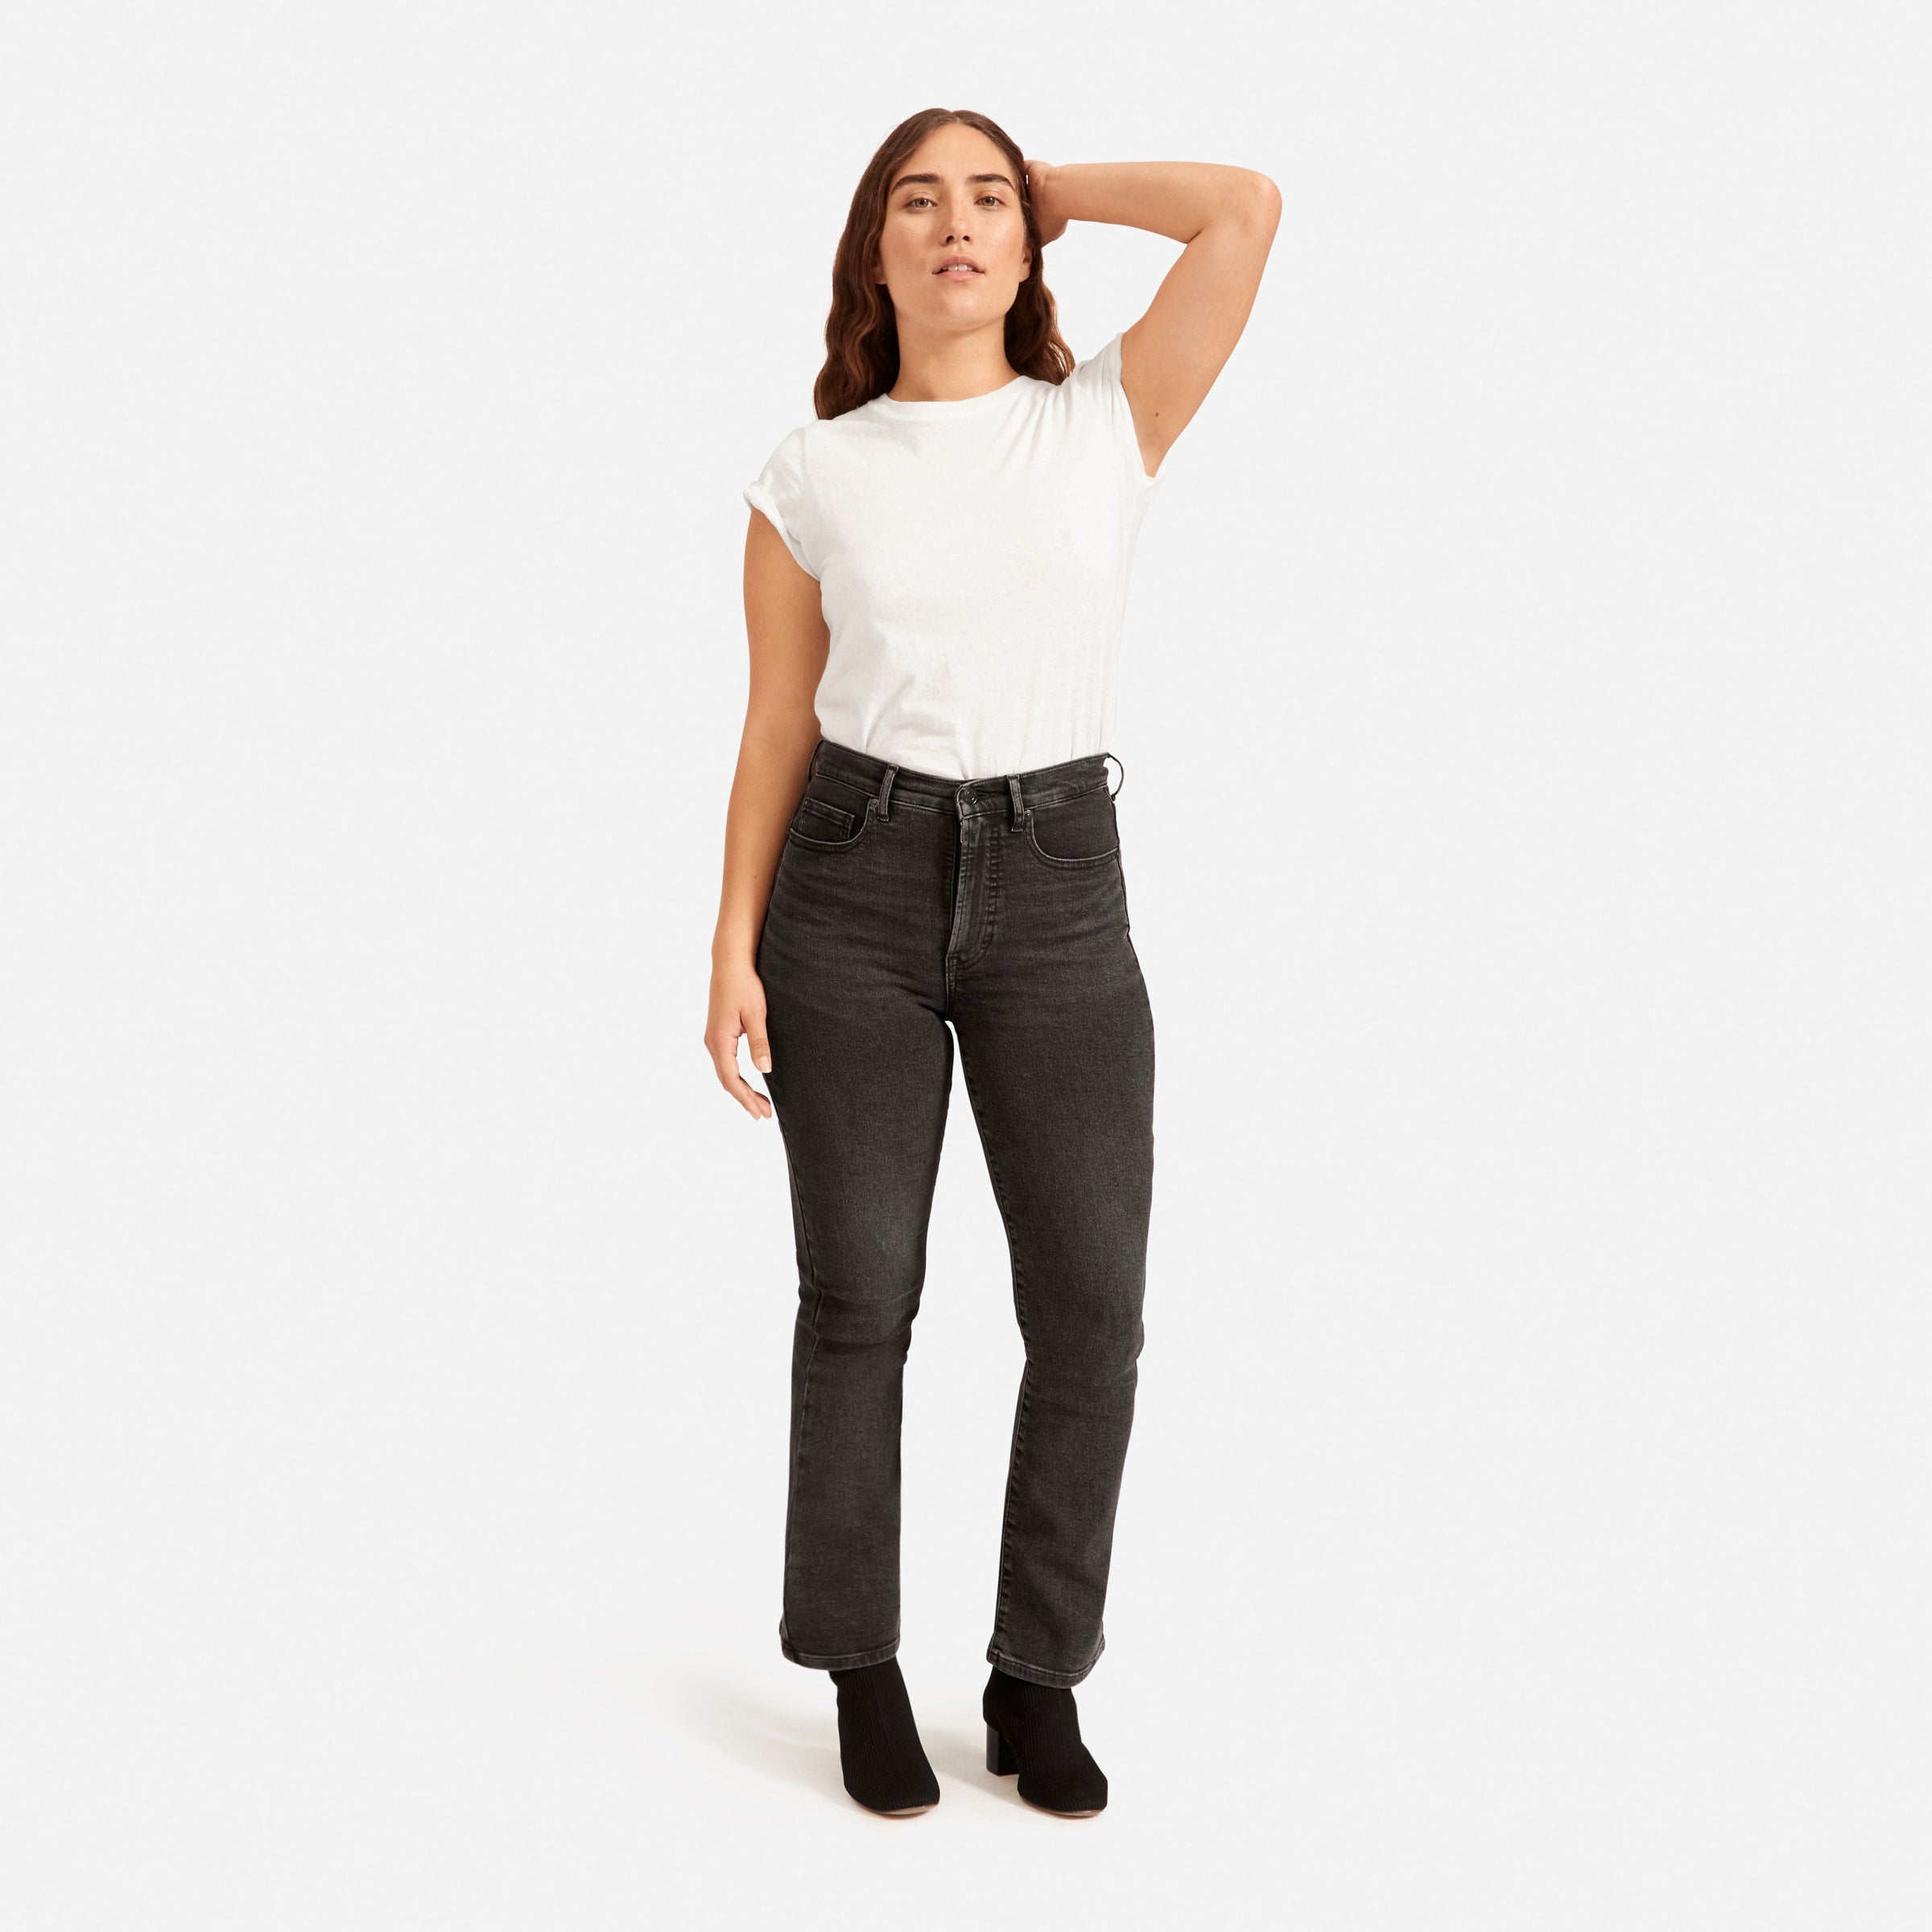 Everlane + The Authentic Stretch Skinny Bootcut – Washed Black